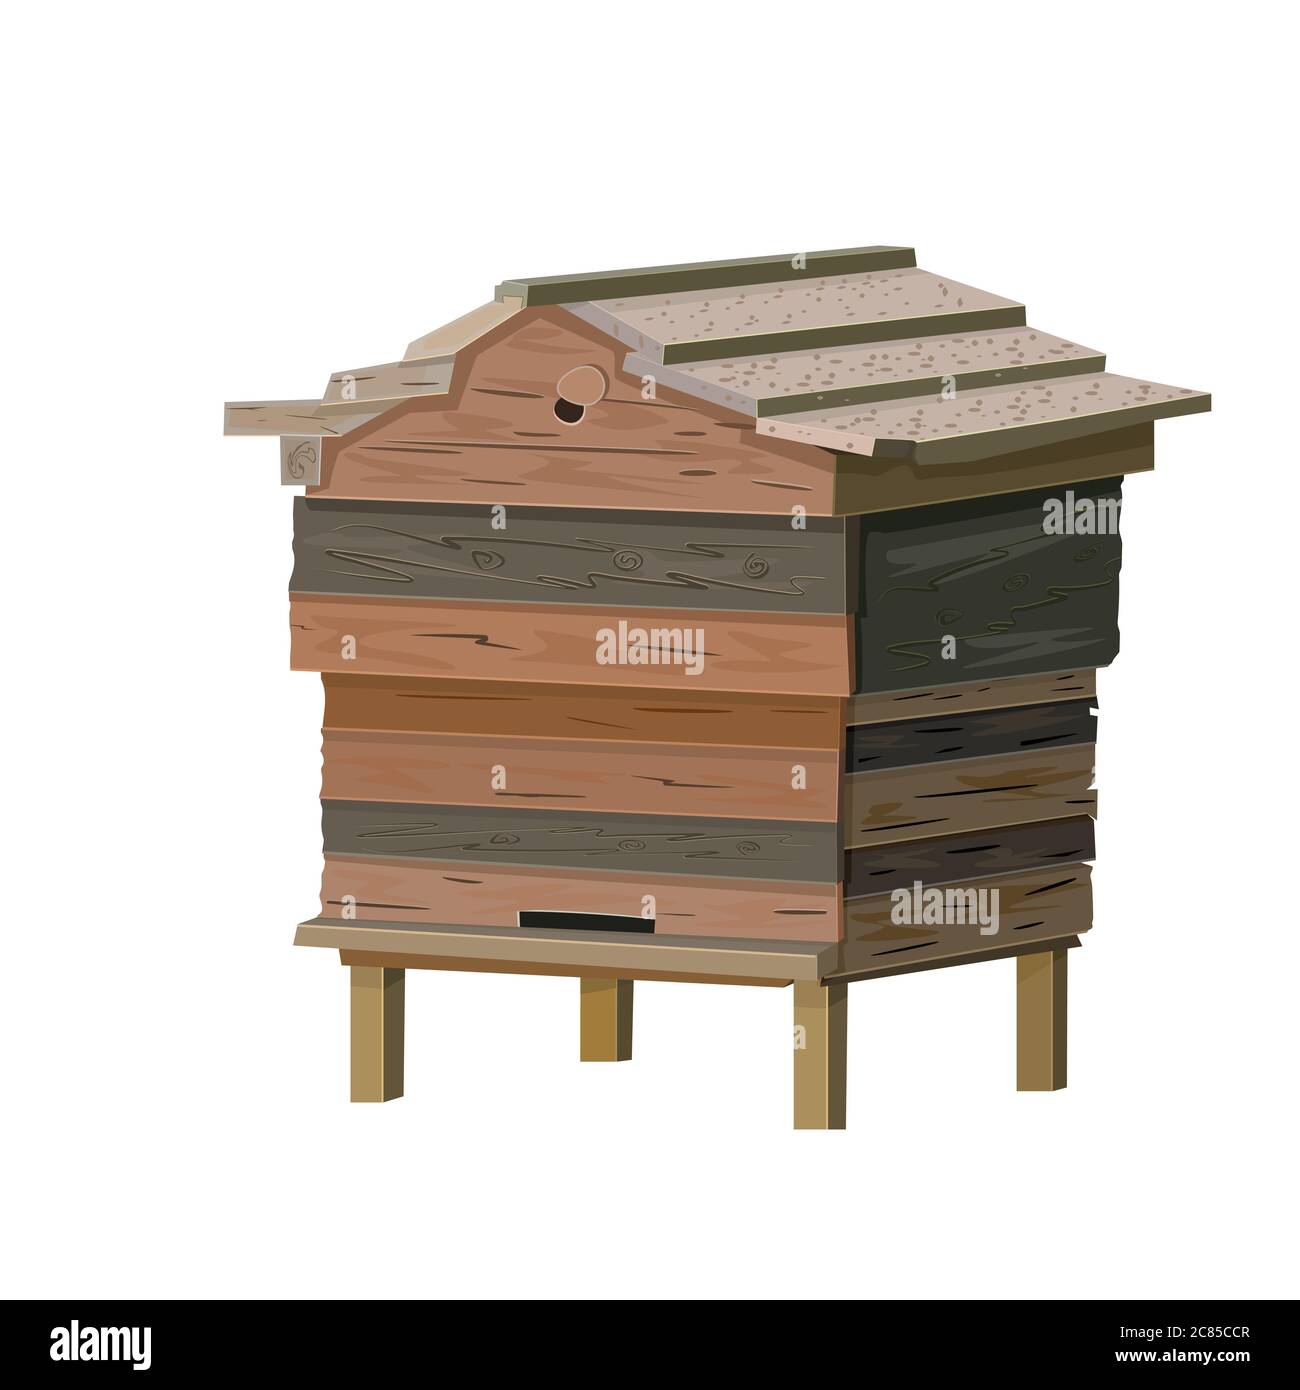 Beehive isolated on white background. Old wooden bee hive. Cartoon illustration hive for beekeeping, bee colony housing. Apiculture icon. Stock vector Stock Vector